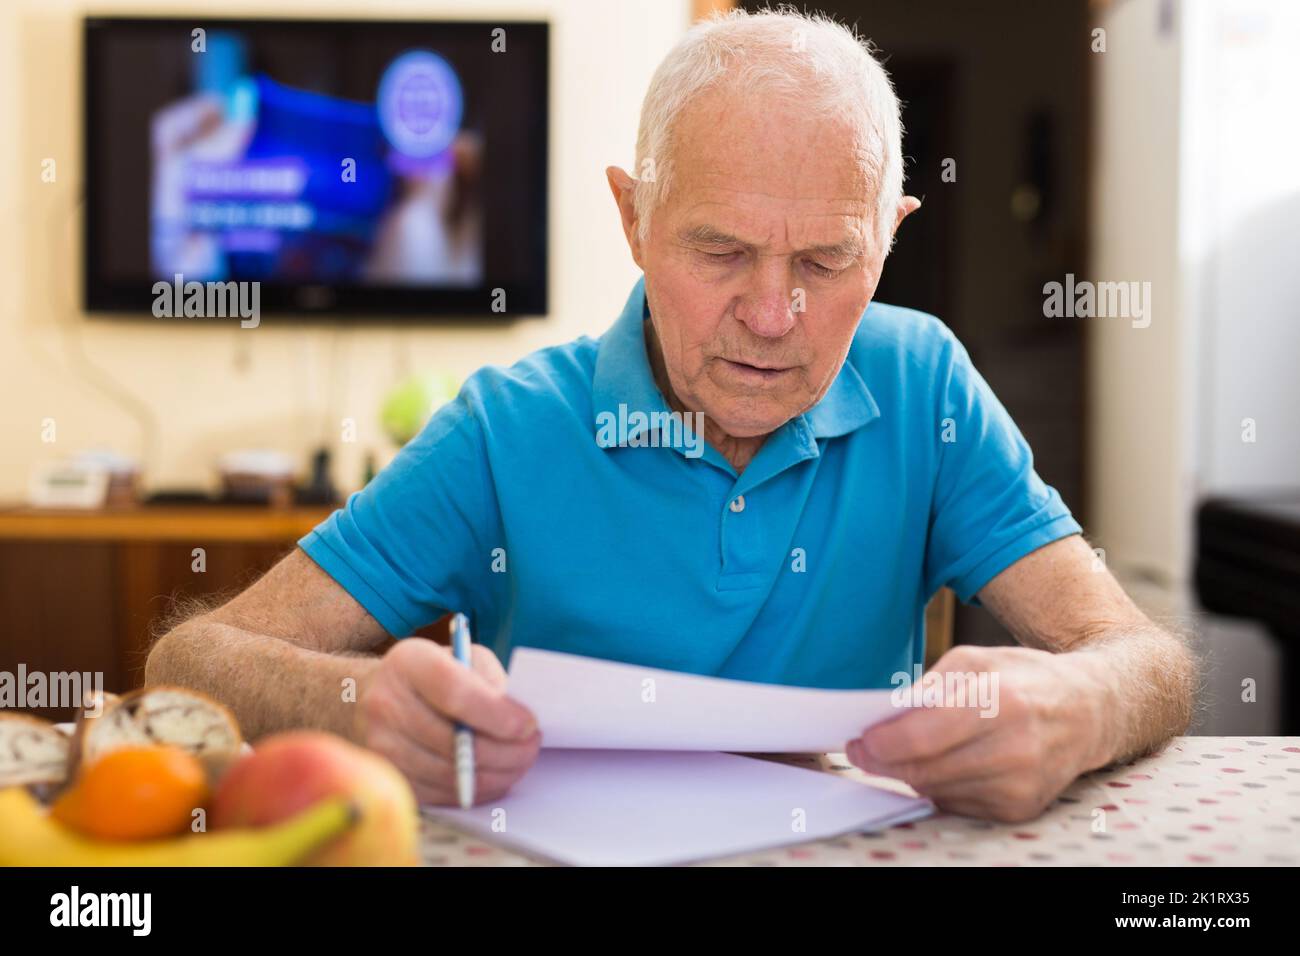 Serious older man sitting at table writing letter or filling some paper form Stock Photo